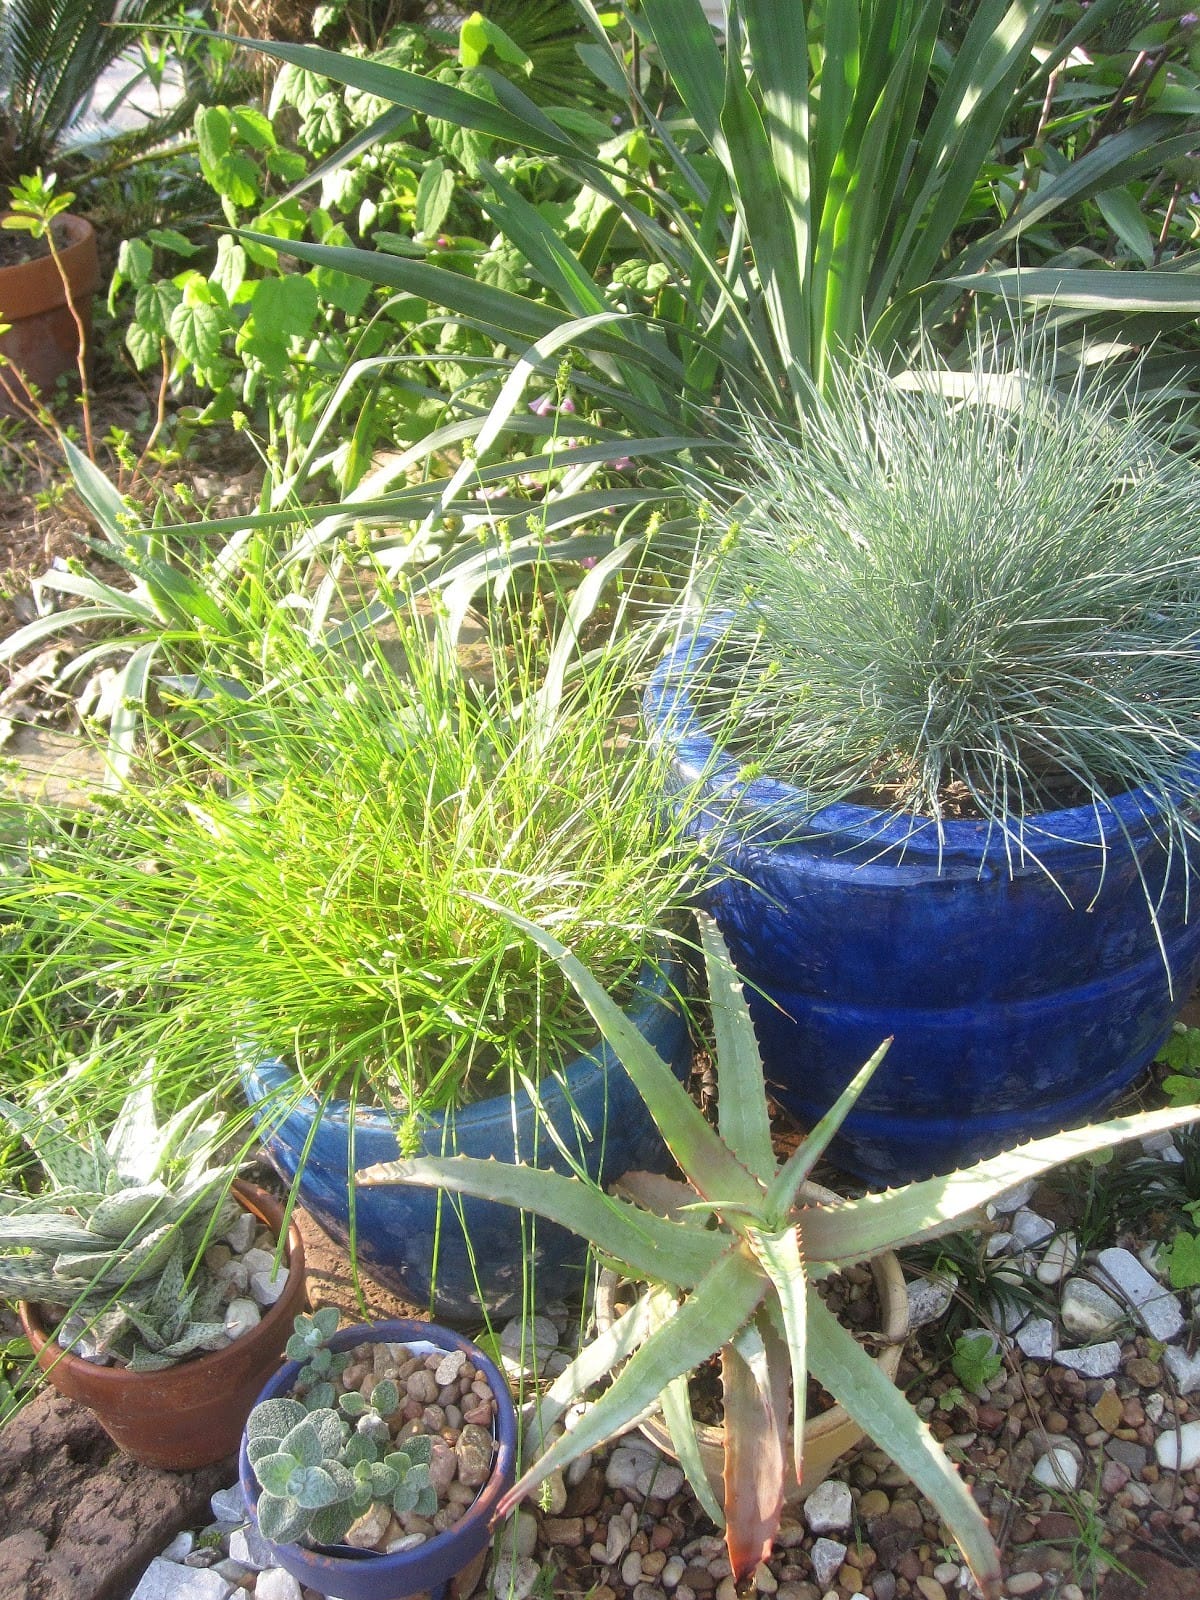 10 Garden Elements With Big Impact. blue pottery, grasses and cactus, container gardening